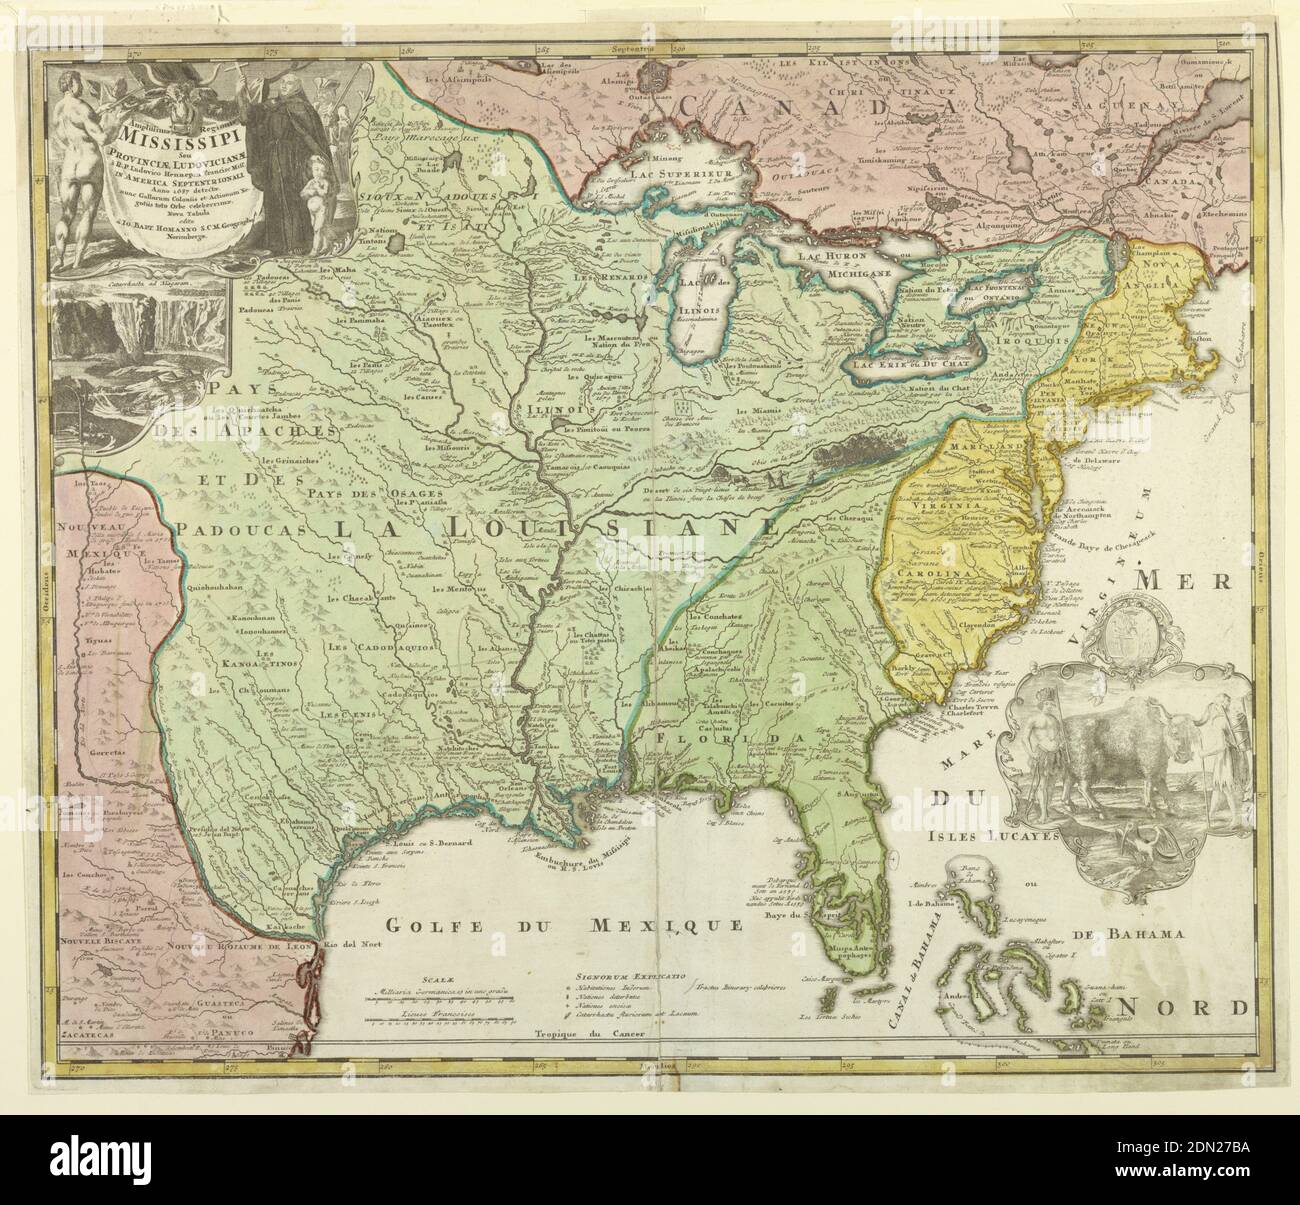 Map of Louisiana (Mississippi), Johann Baptista Homann, 1664 – 1724, Etching and engraving, hand-colored, on white laid paper, Map of Louisiana shows the Eastern part of the United States up to Canada; different colors are used for Louisiana (green), Eastern States (yellow), New Mexico (pink) and Canada (pink). On upper left corner, title of map embellished with an allegorical figure; below view of Niagara Falls. In lower right corner, a vignette with the coat-of-arms of Lns. Gall Societatis Indiae Occidentalis and below and Indian man and woman with a bull. Germany, after 1718 Stock Photo